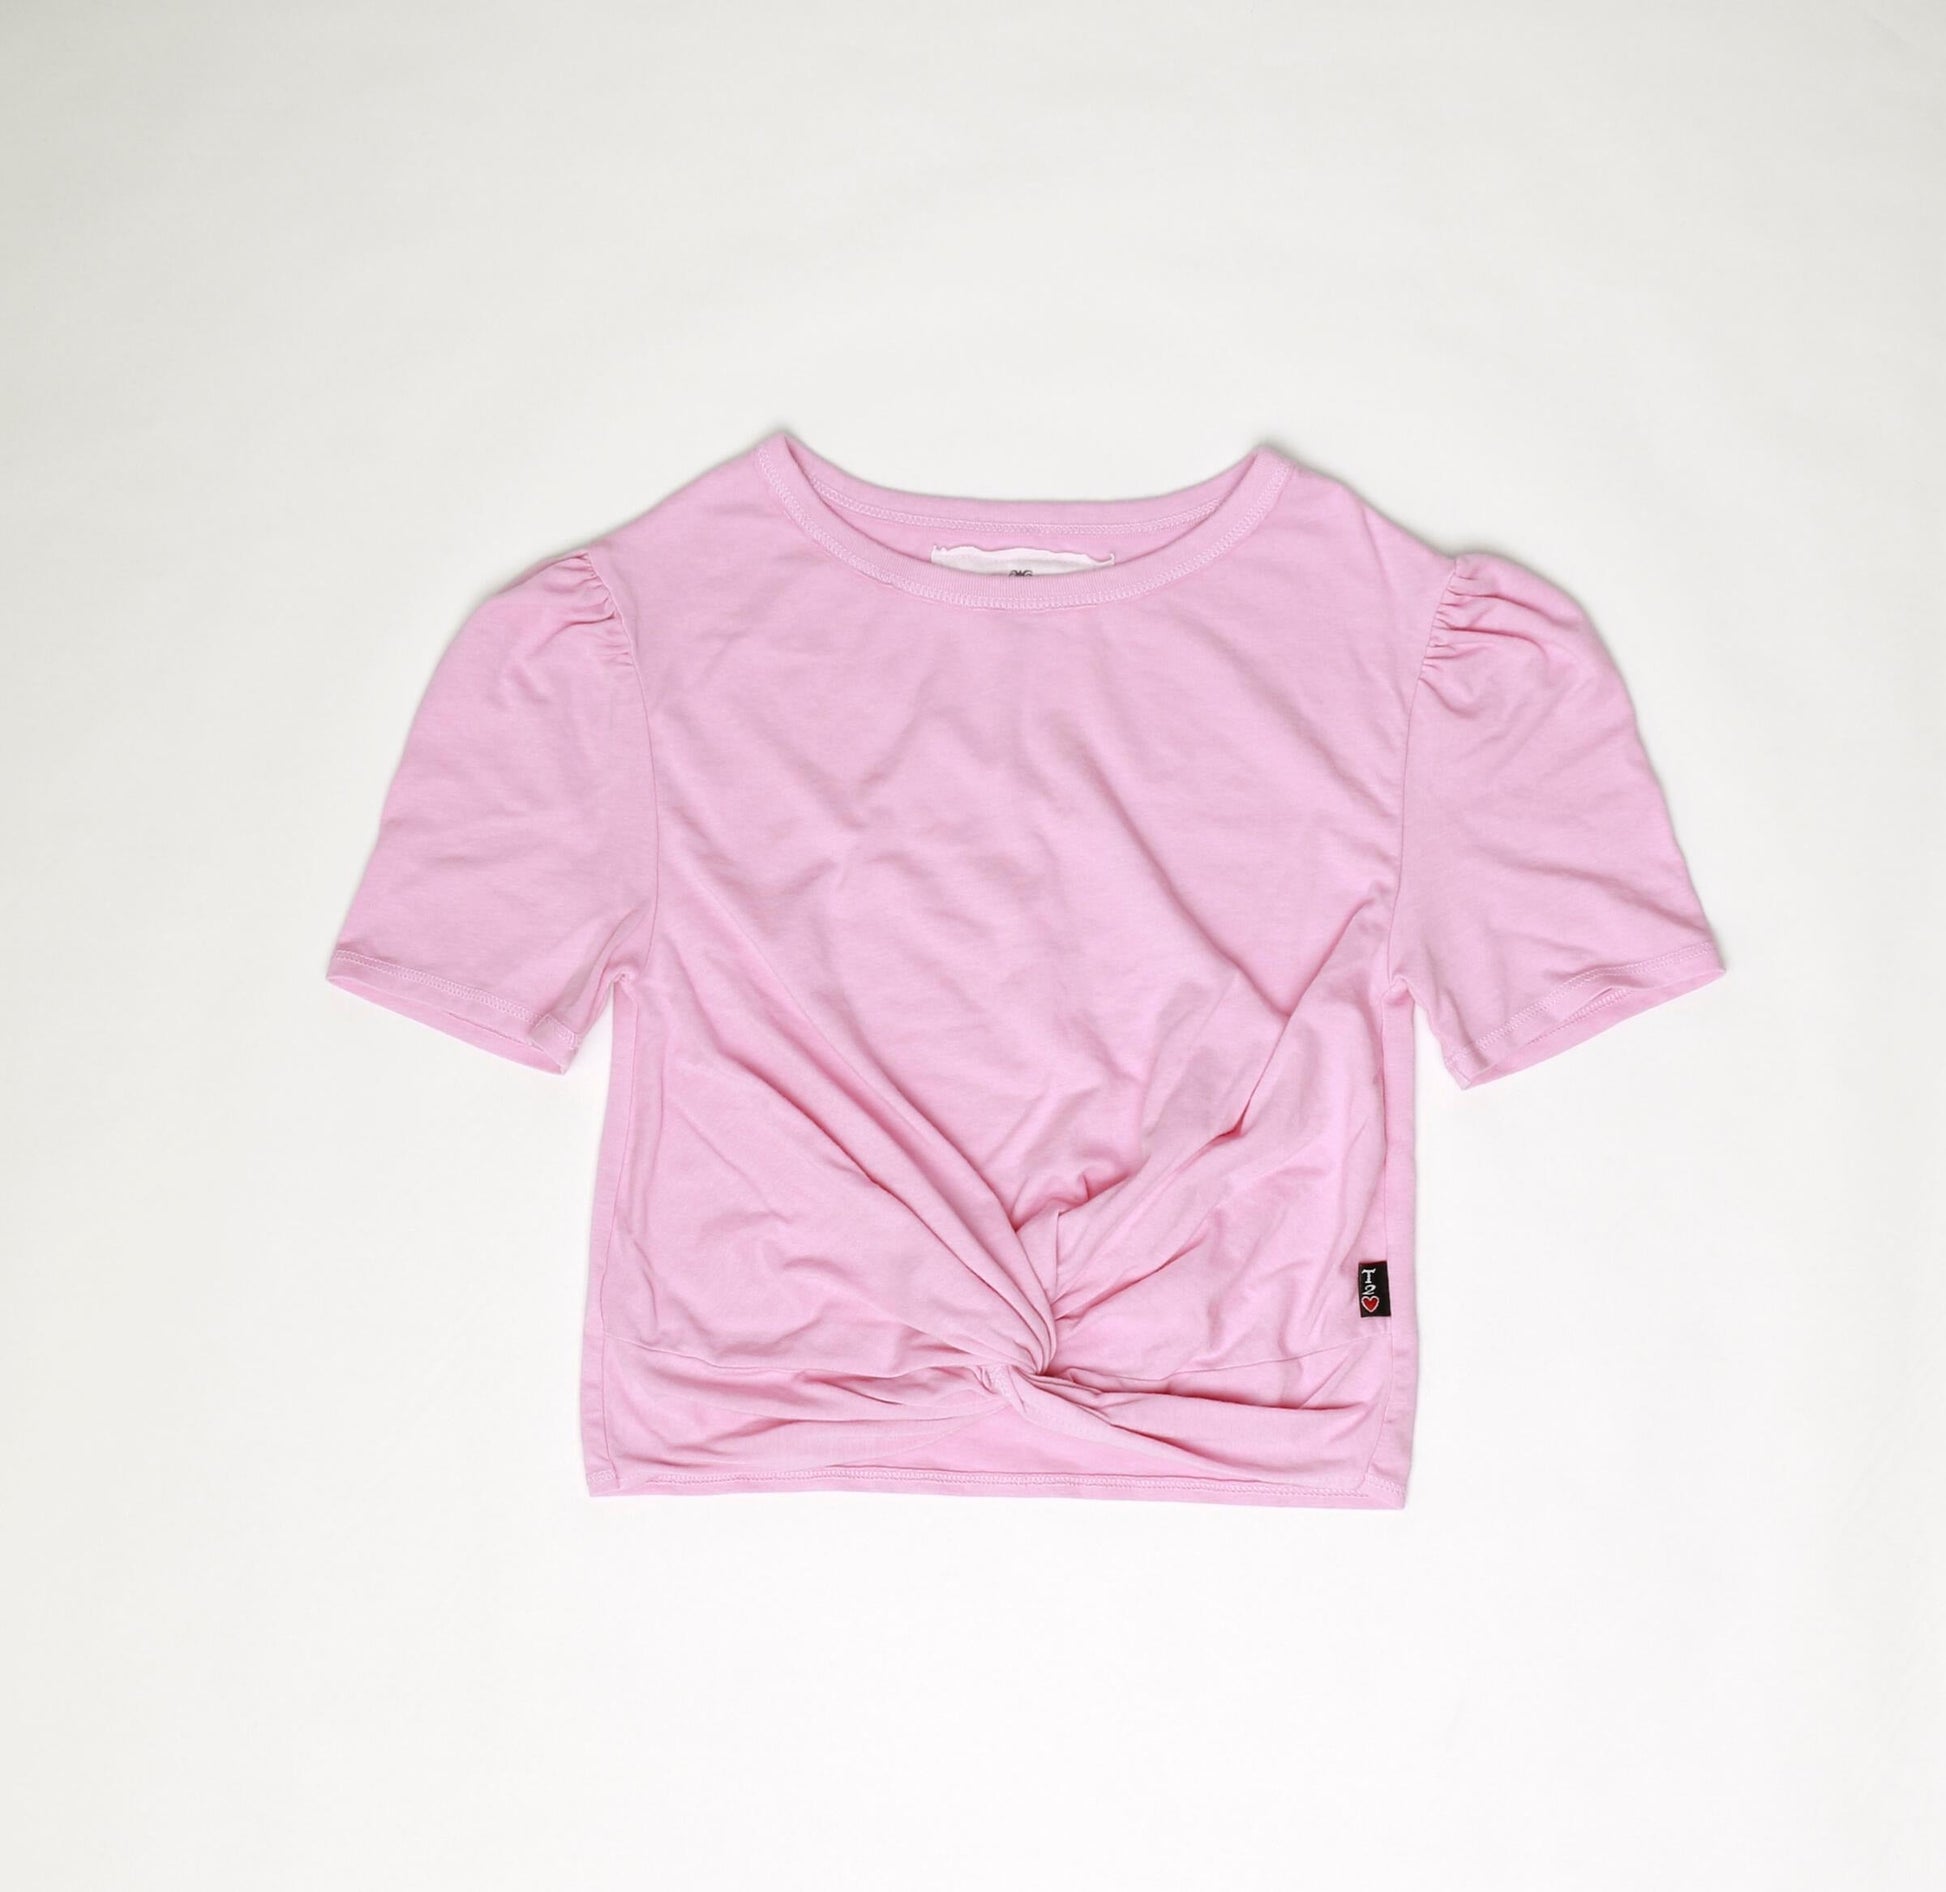 T2Love Girls Knotted Tee – T2Love,